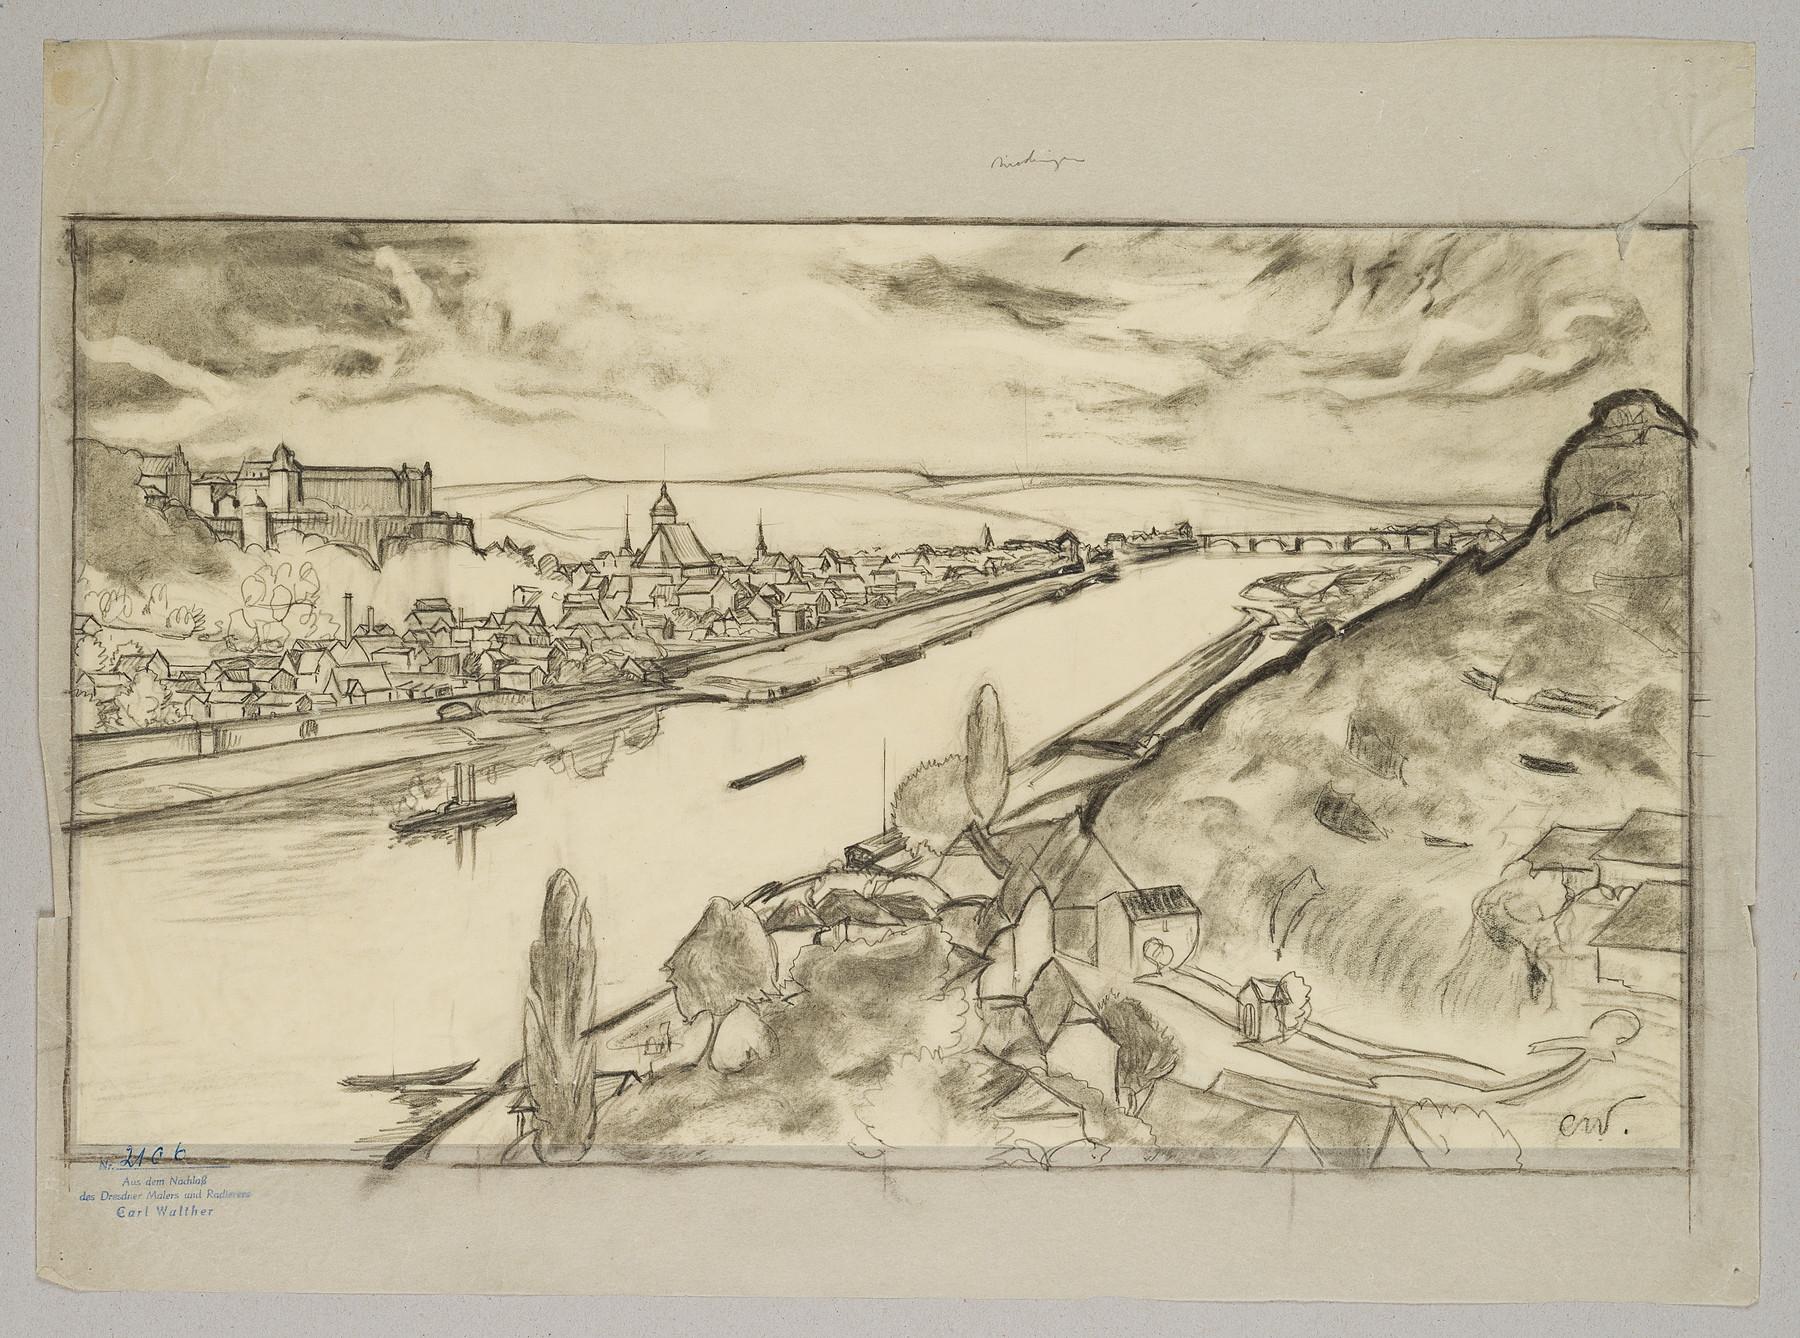 View of Würzburg - Art by Carl August Walther